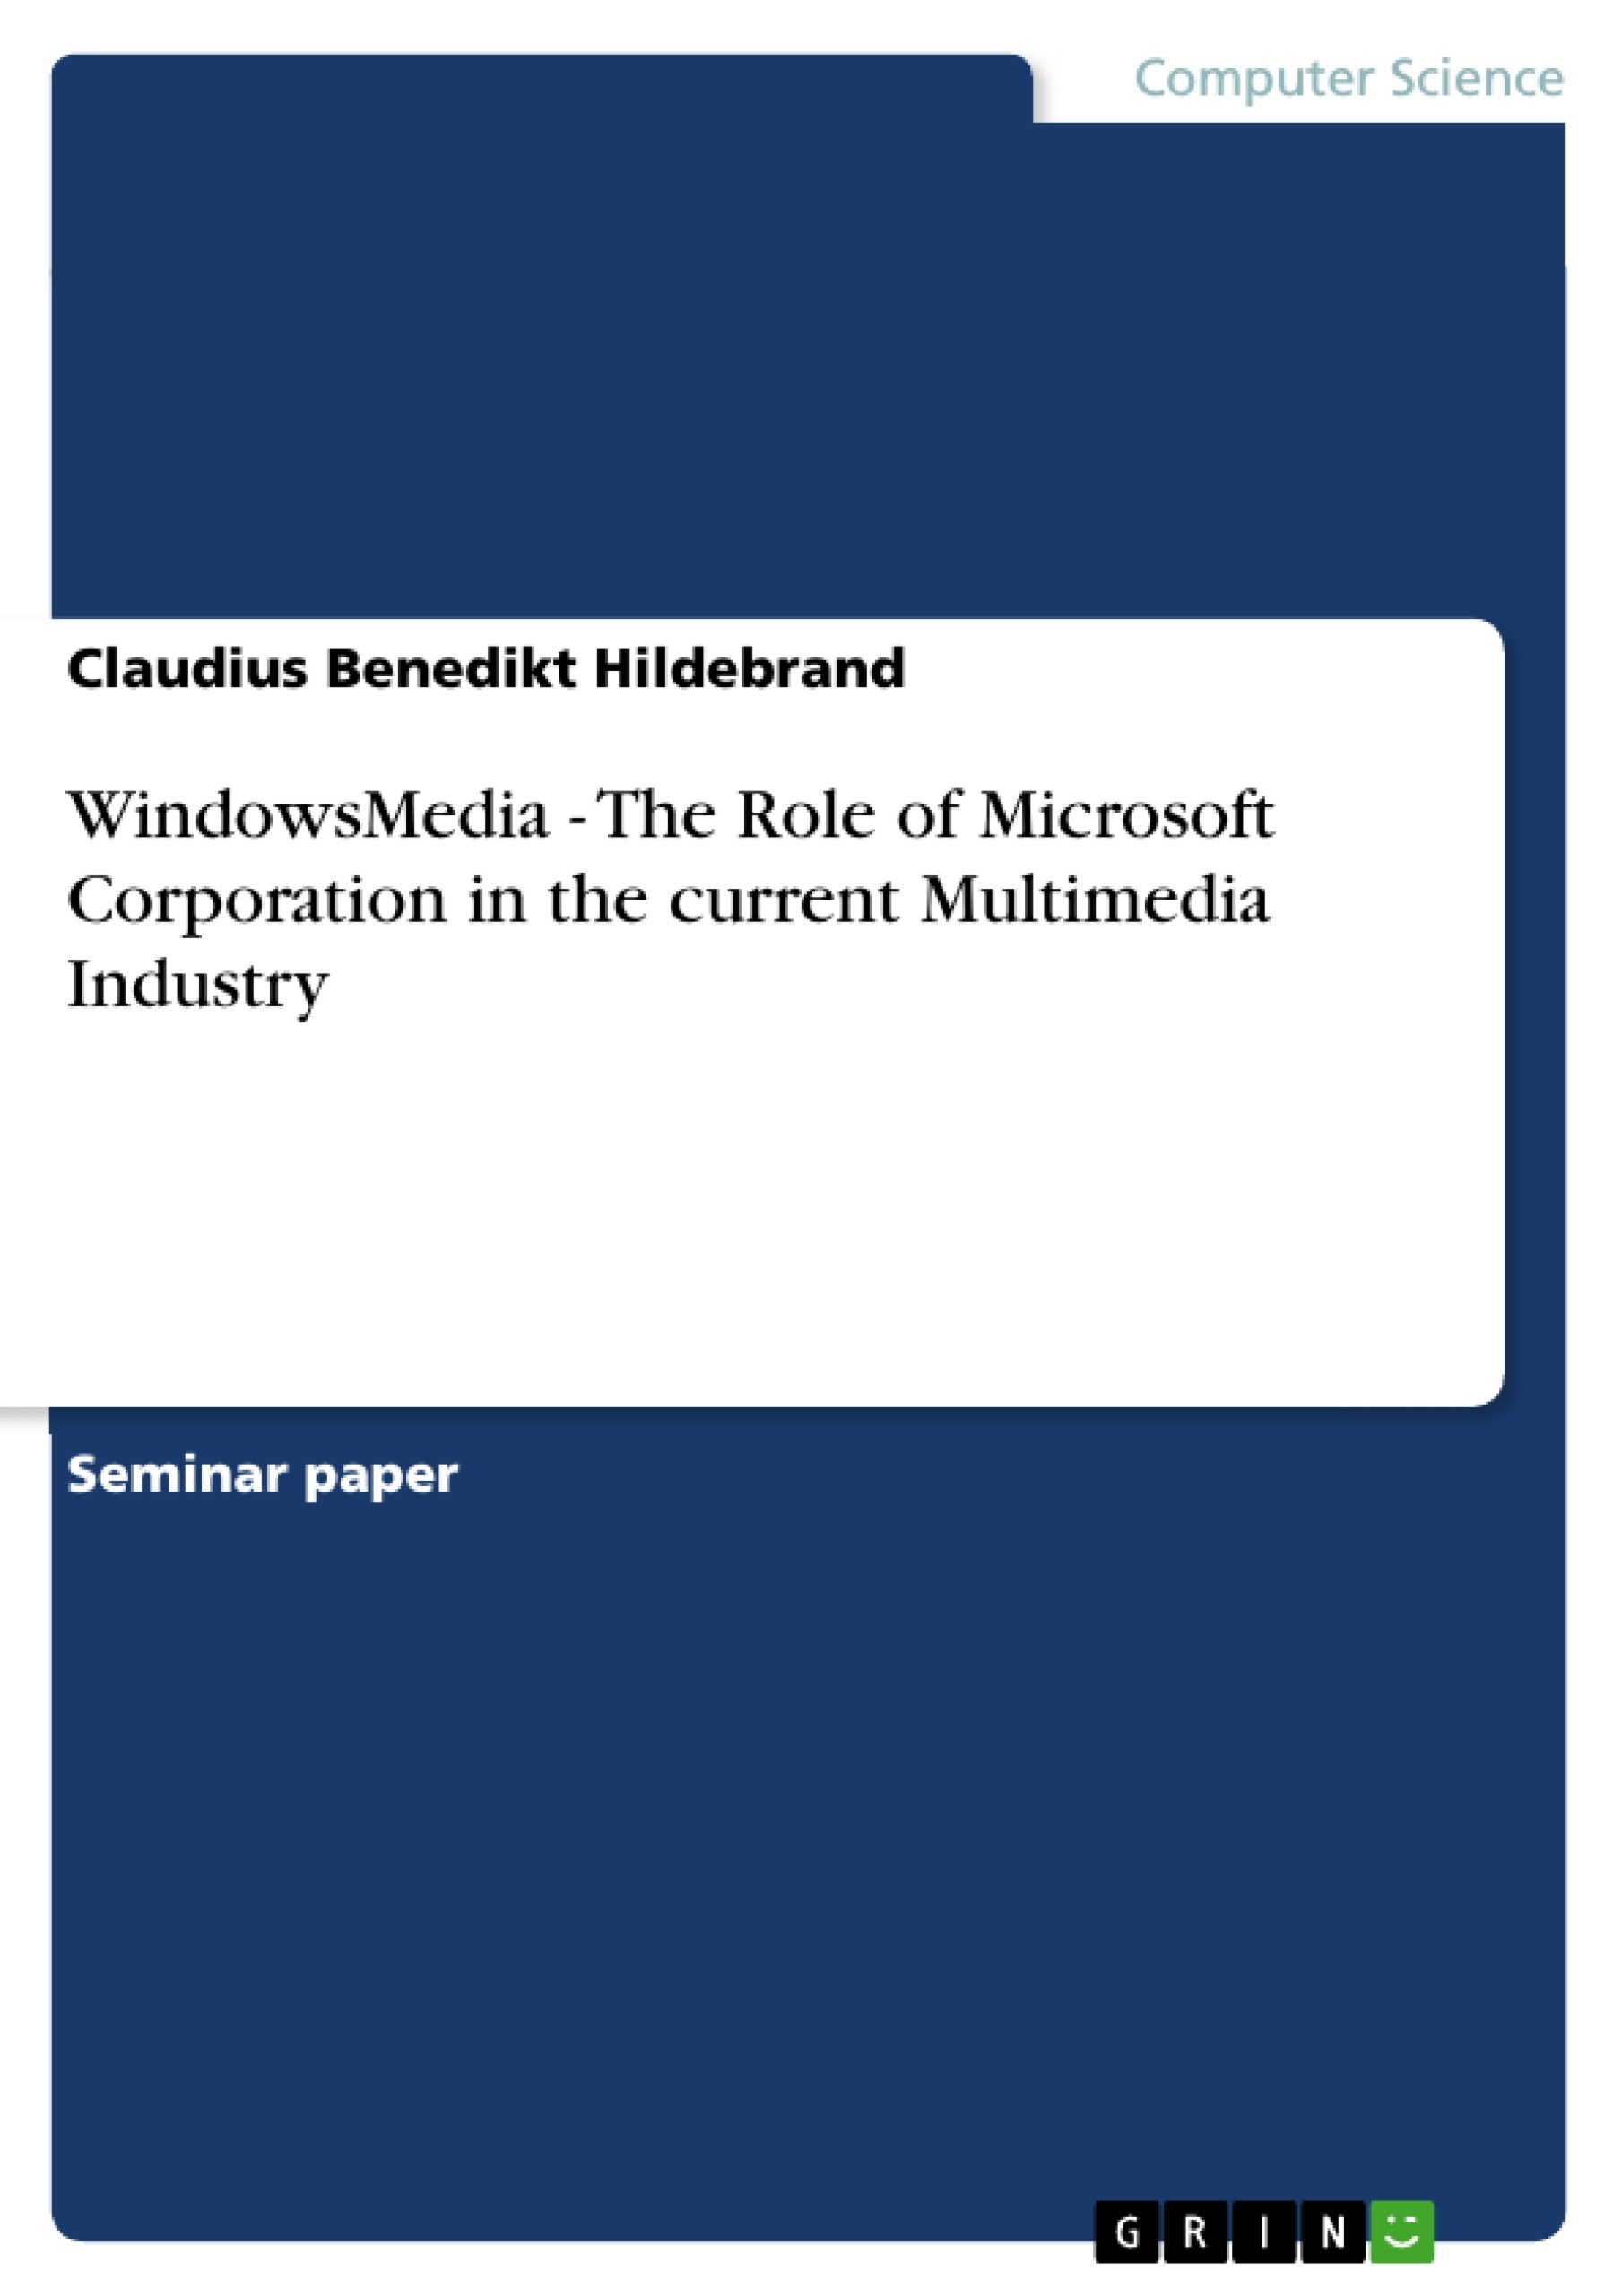 Title: WindowsMedia - The Role of Microsoft Corporation in the current Multimedia Industry